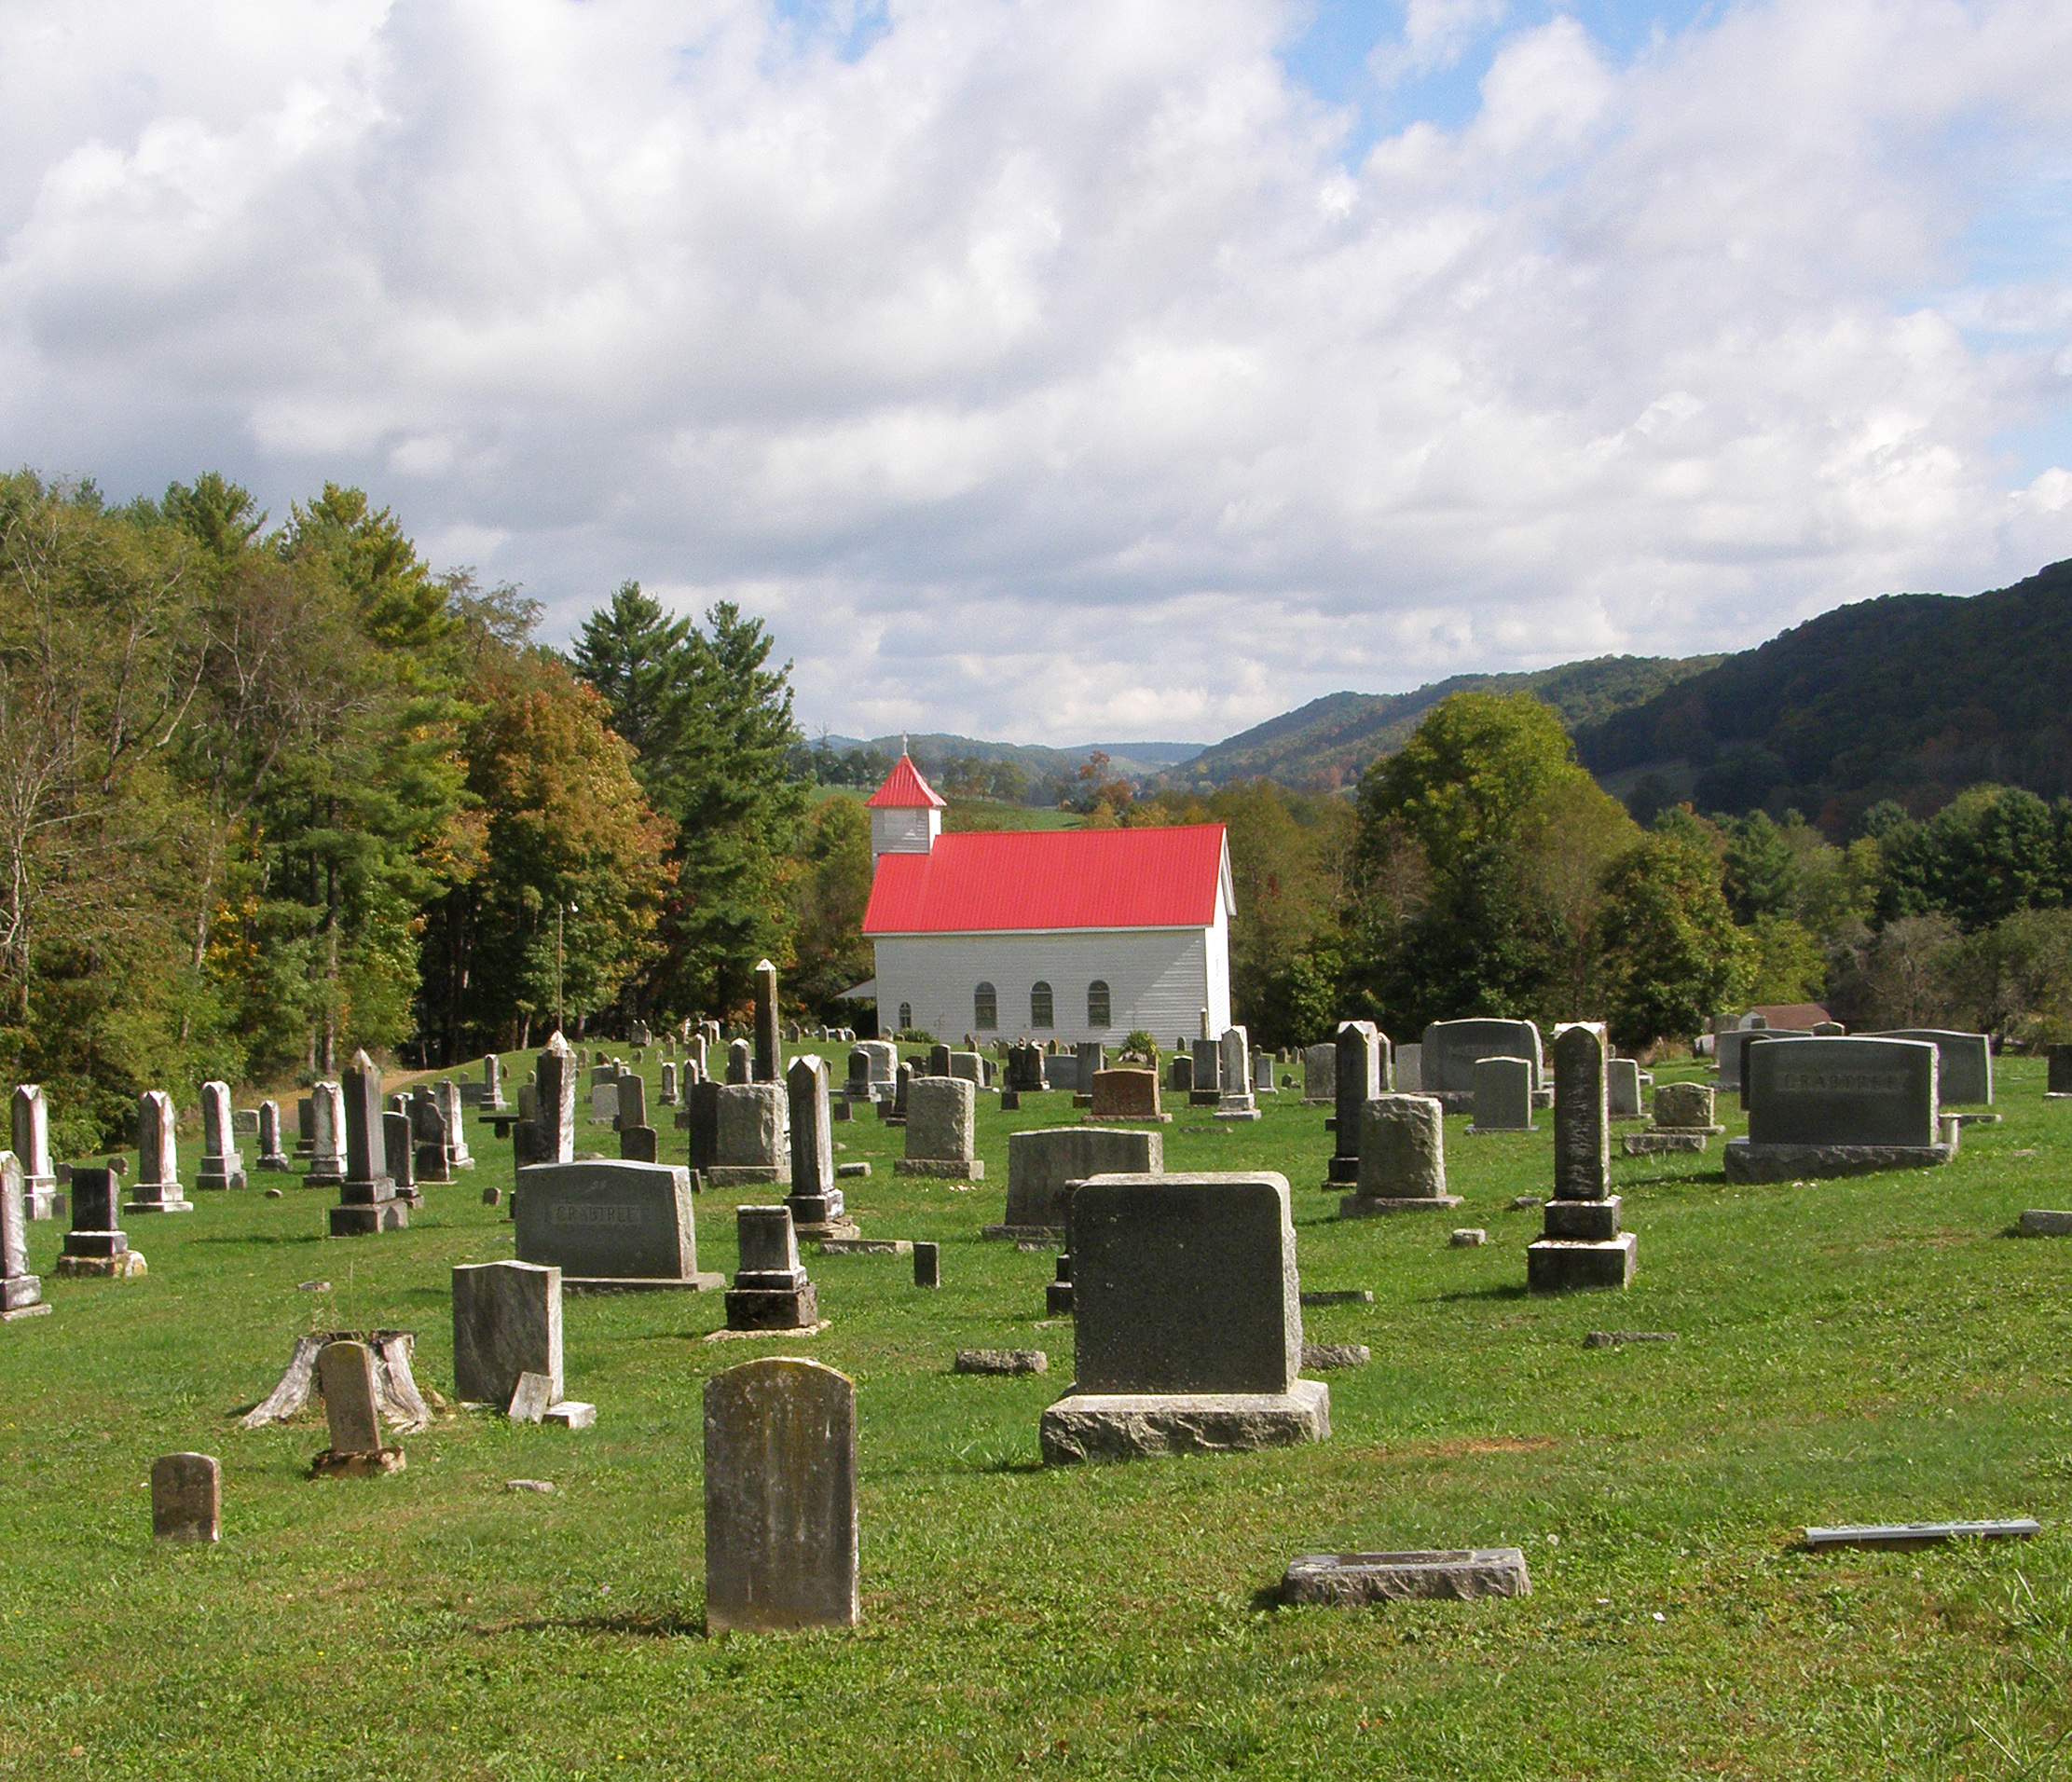 Sharon Lutheran Church and Cemetery